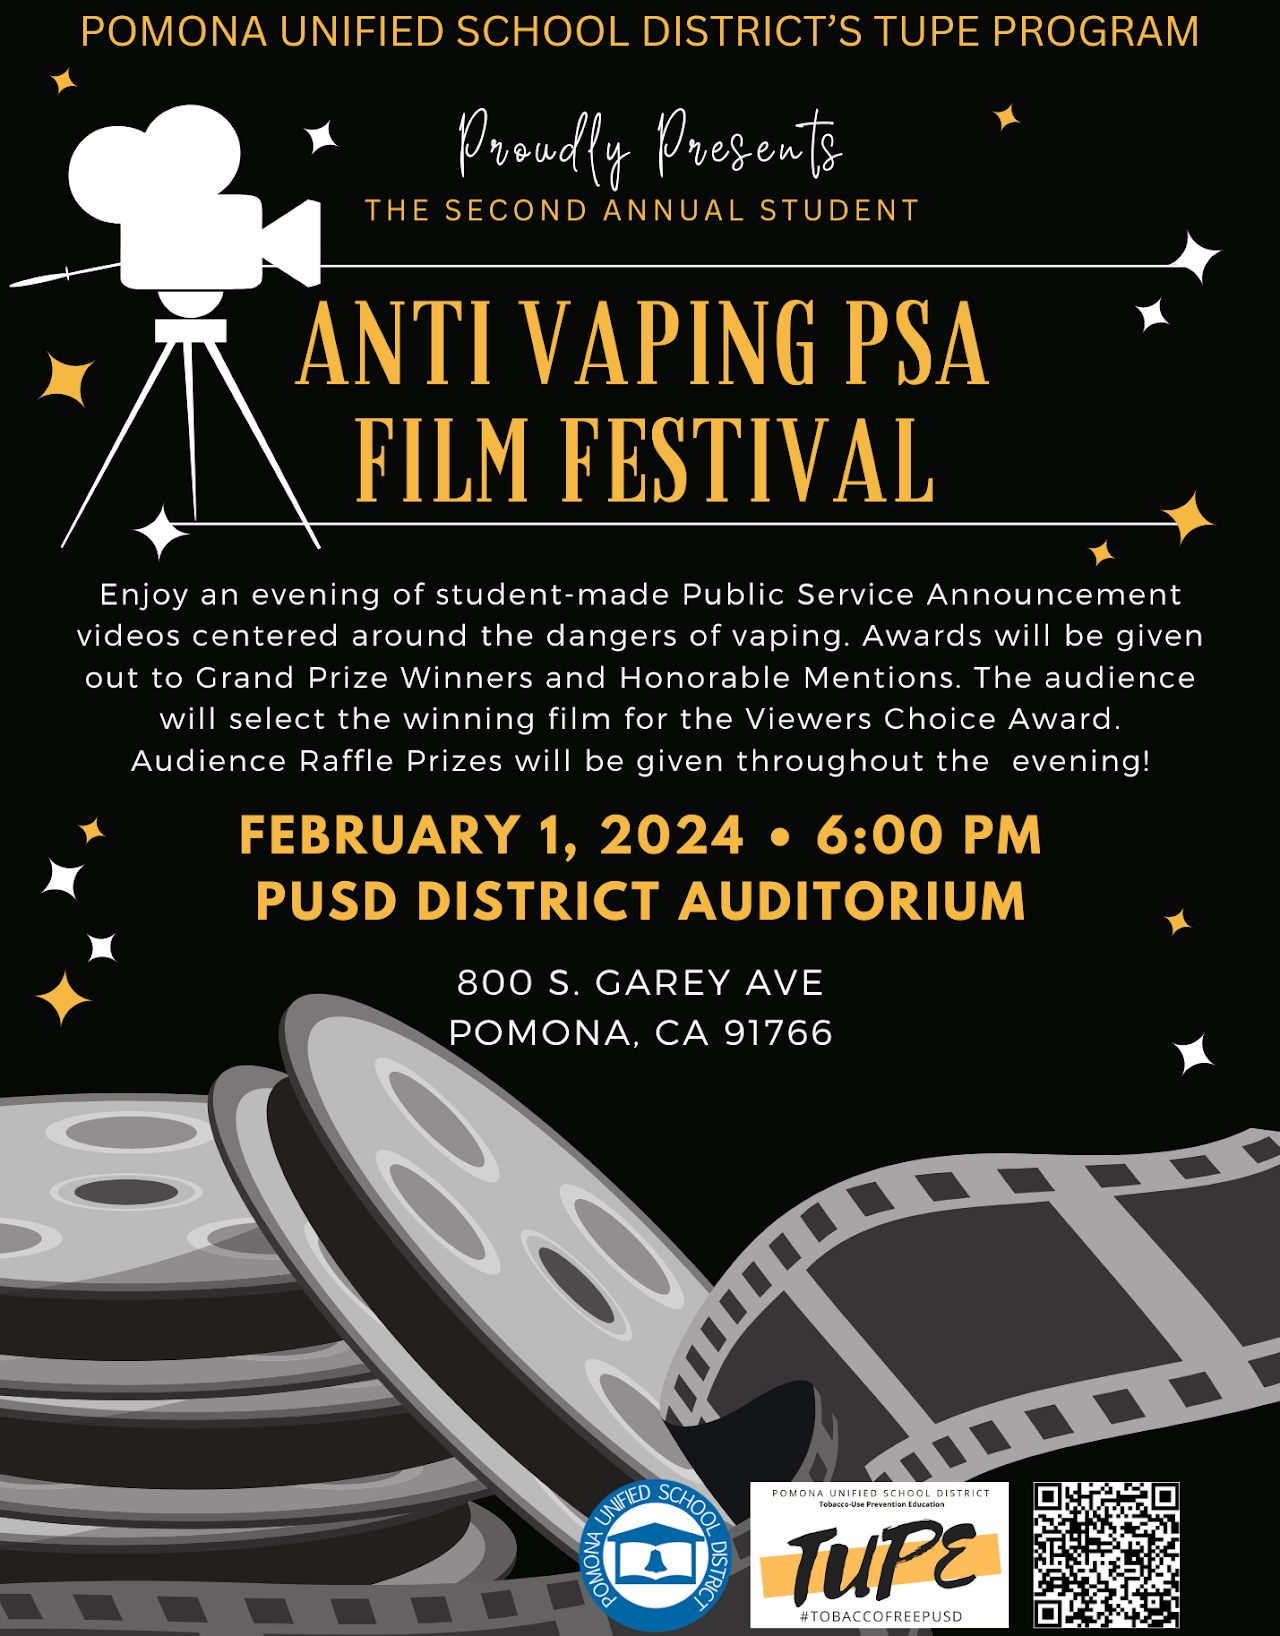 TUPE PSA Film Festival - image for web, event is on 2/1/24